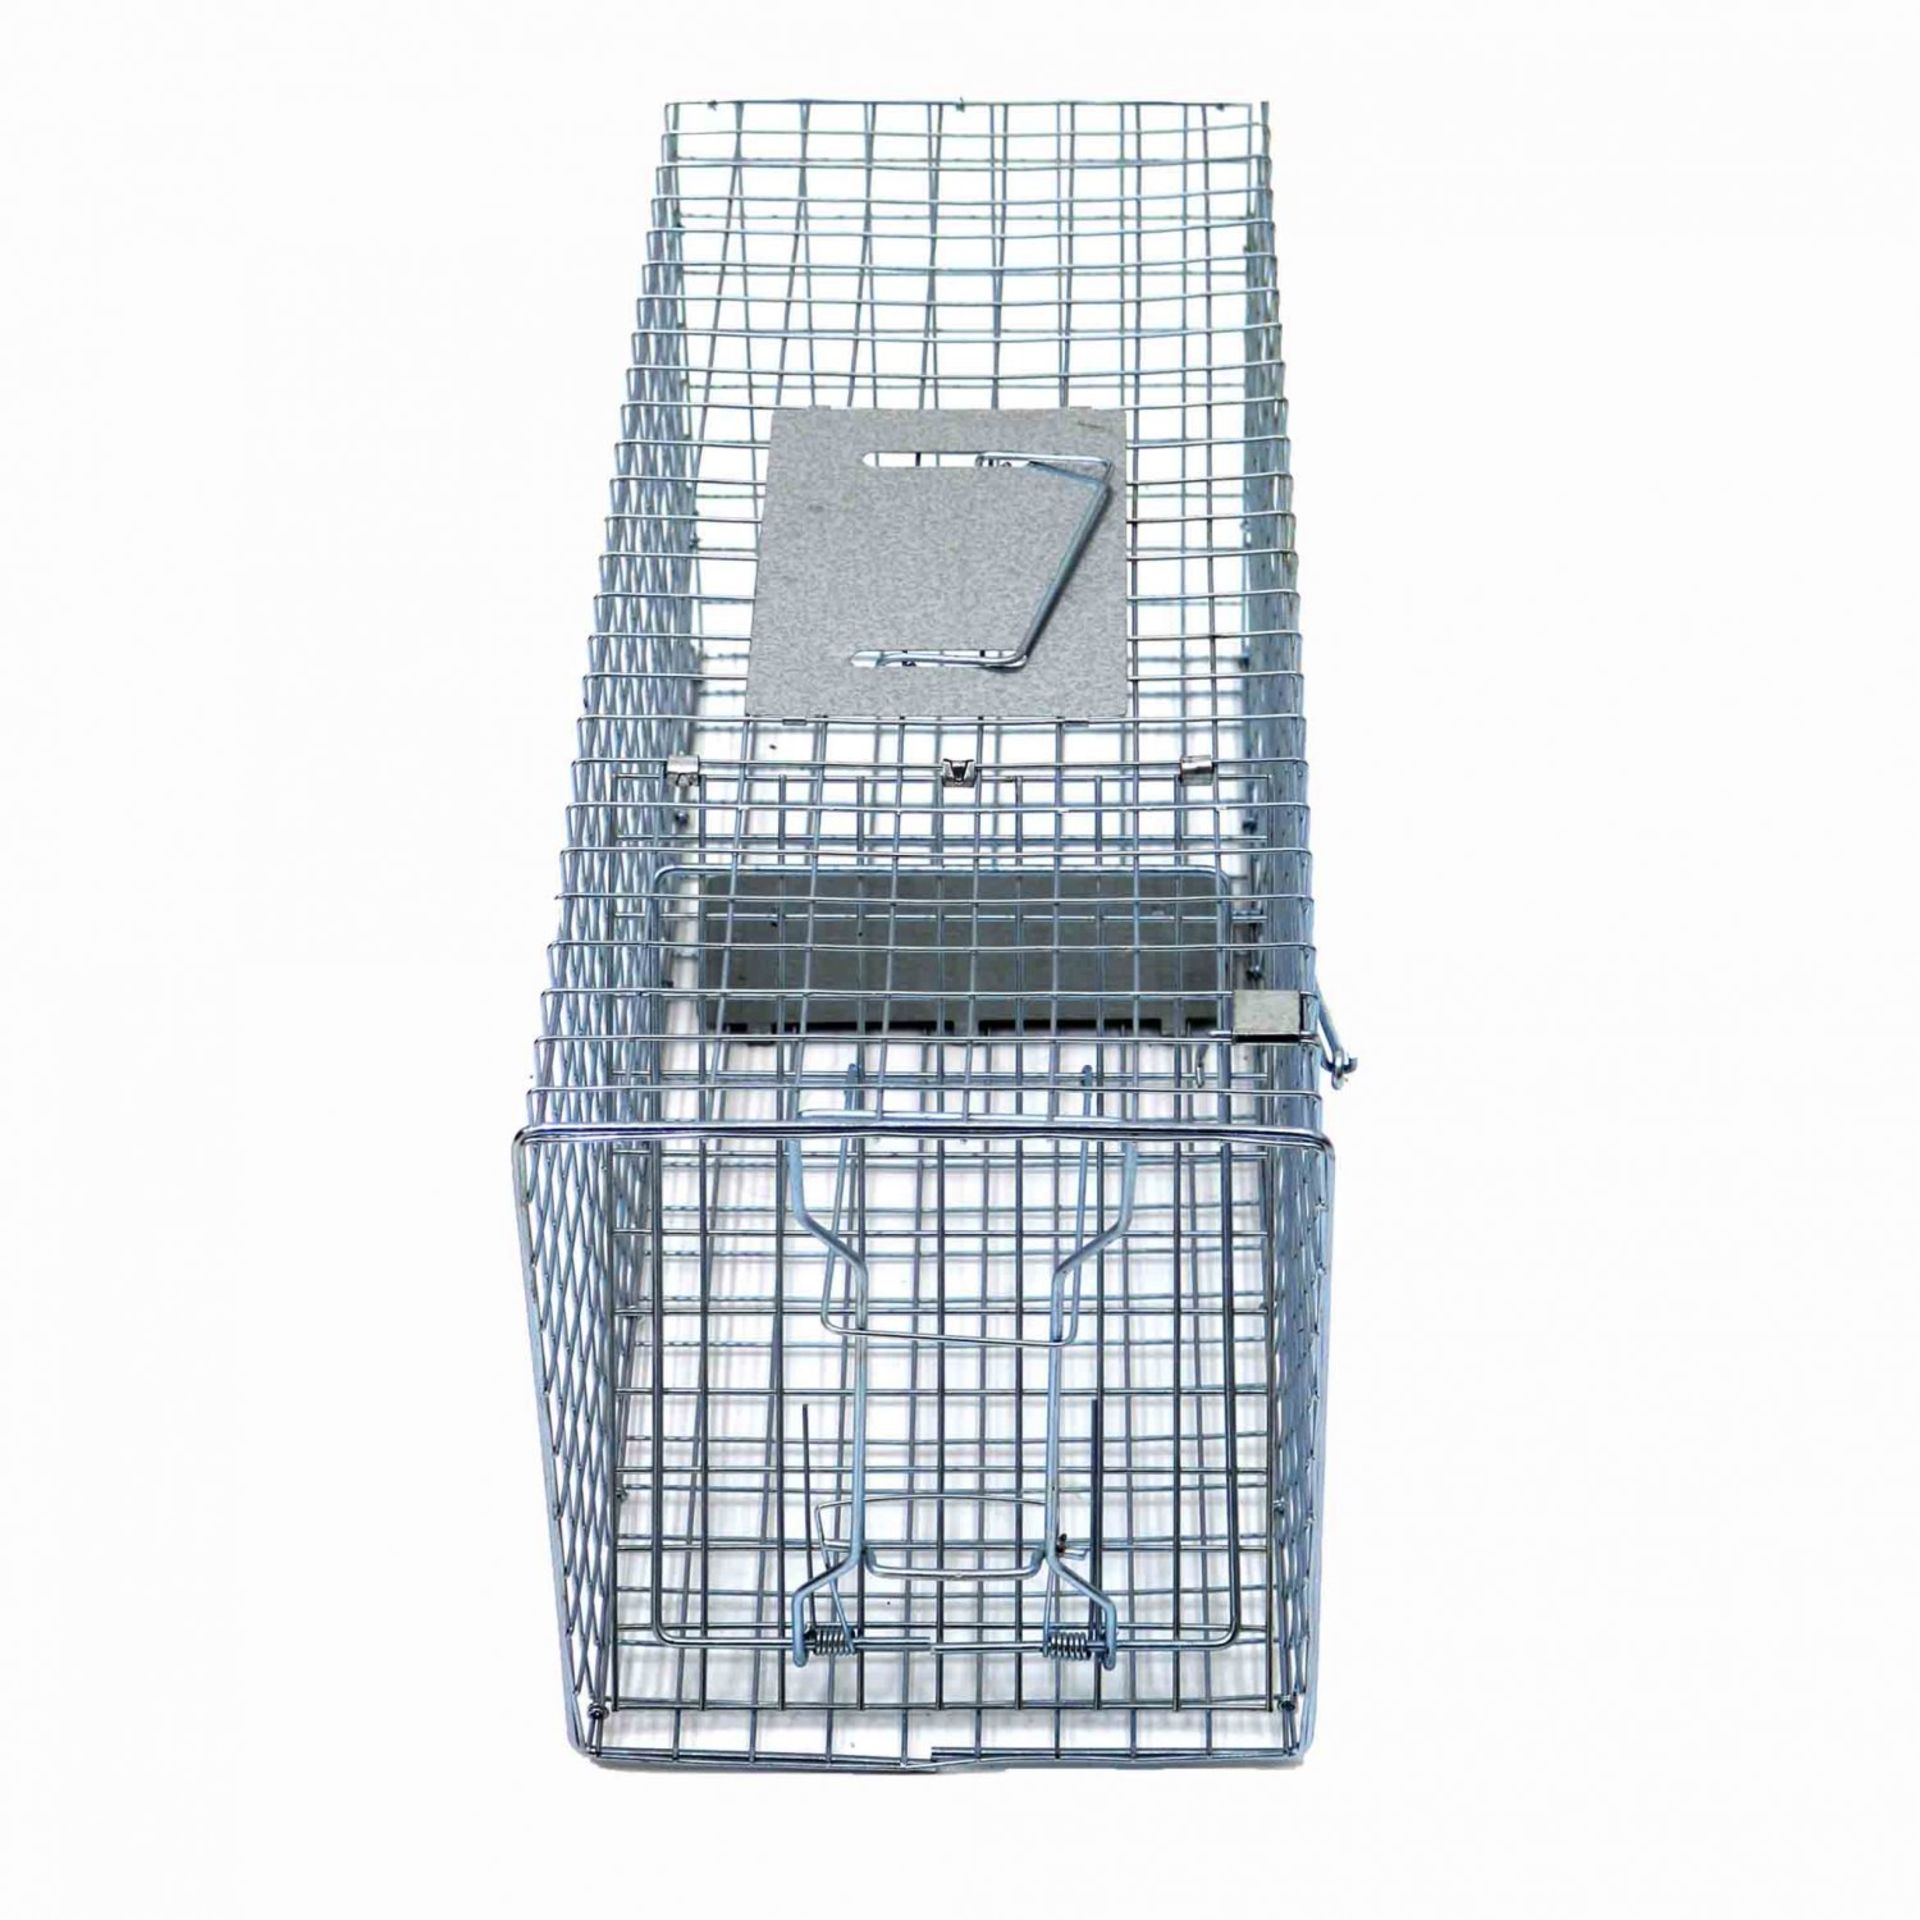 (PP38) Large Humane Animal Rodent Rat Pest Trap Cage Our humane animal trap is fully ... - Image 2 of 2